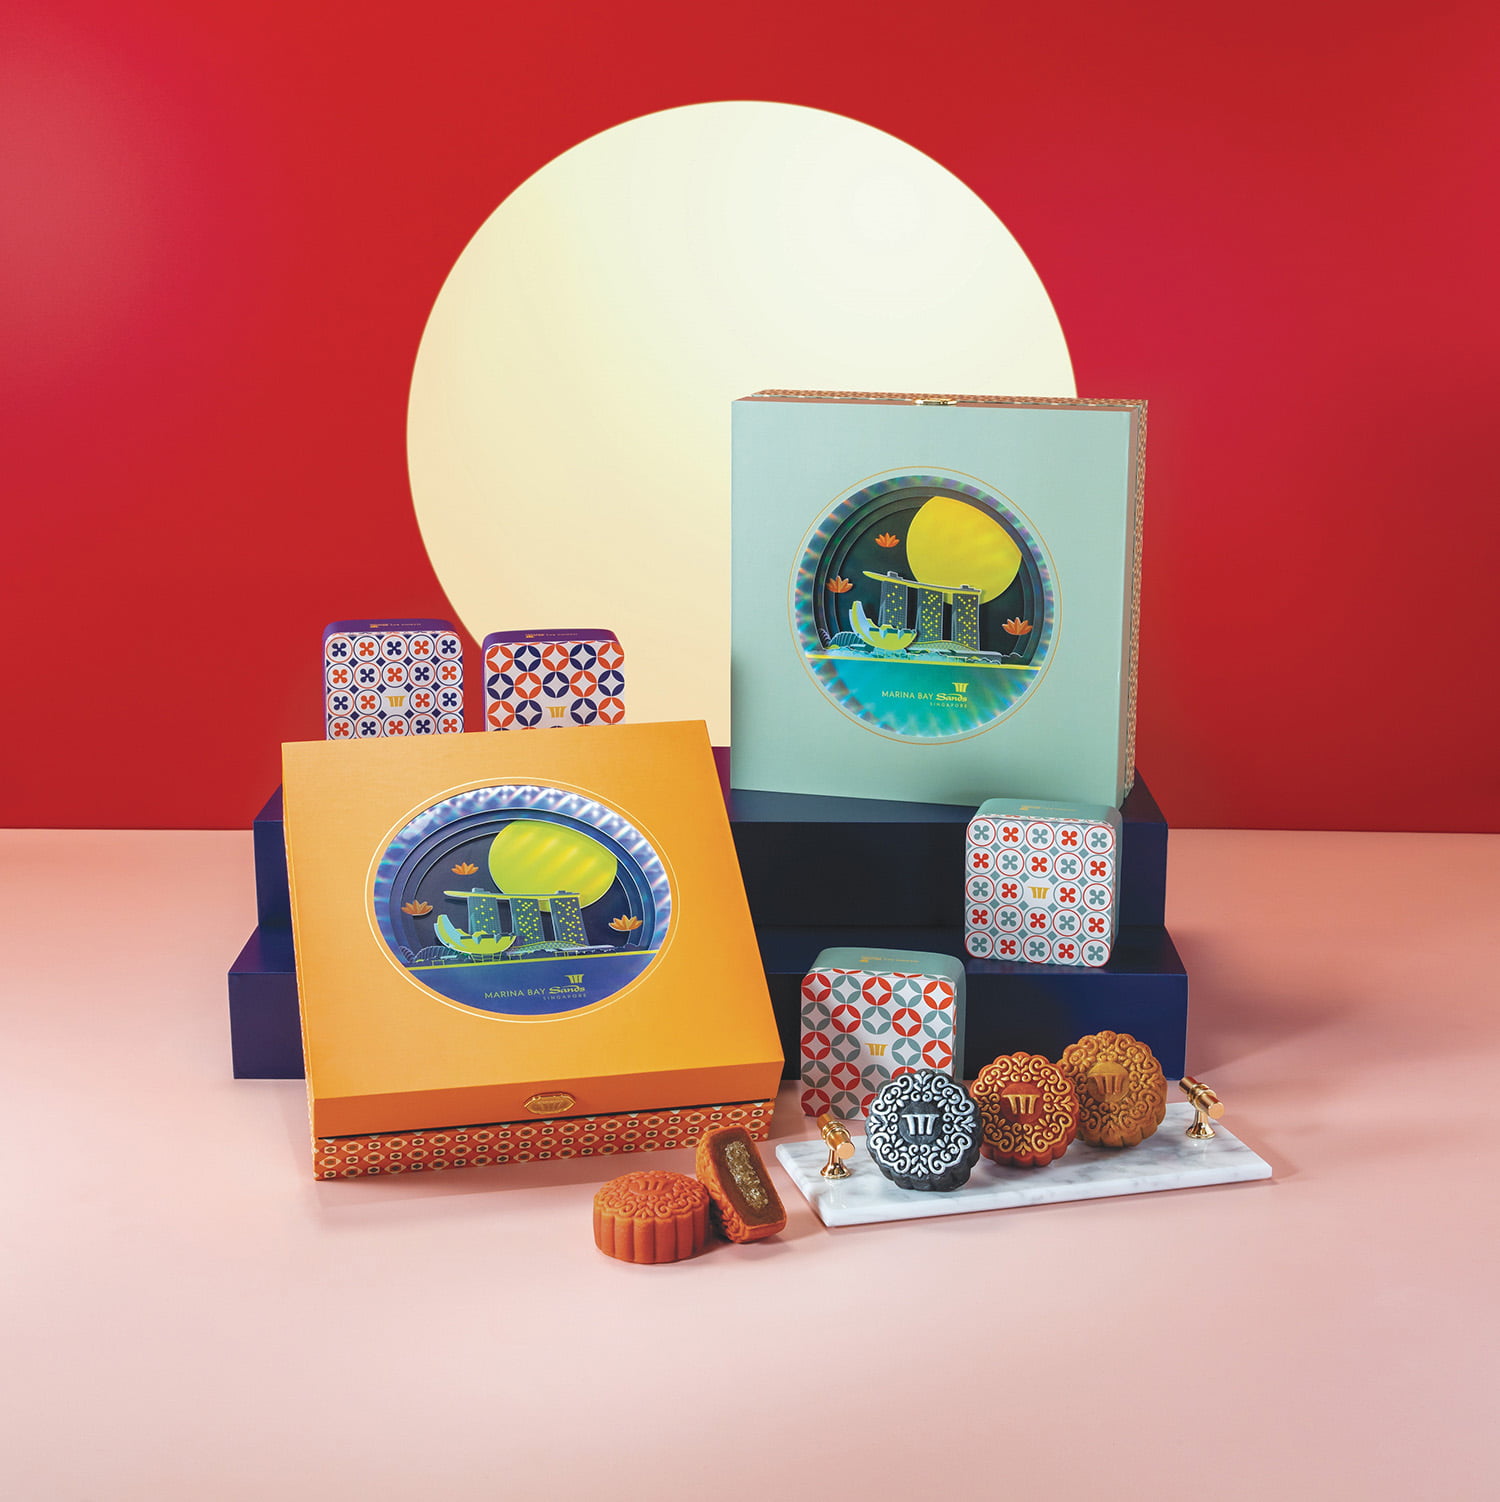 Marina Bay Sands Premium Edition Classic and Modern mooncakes